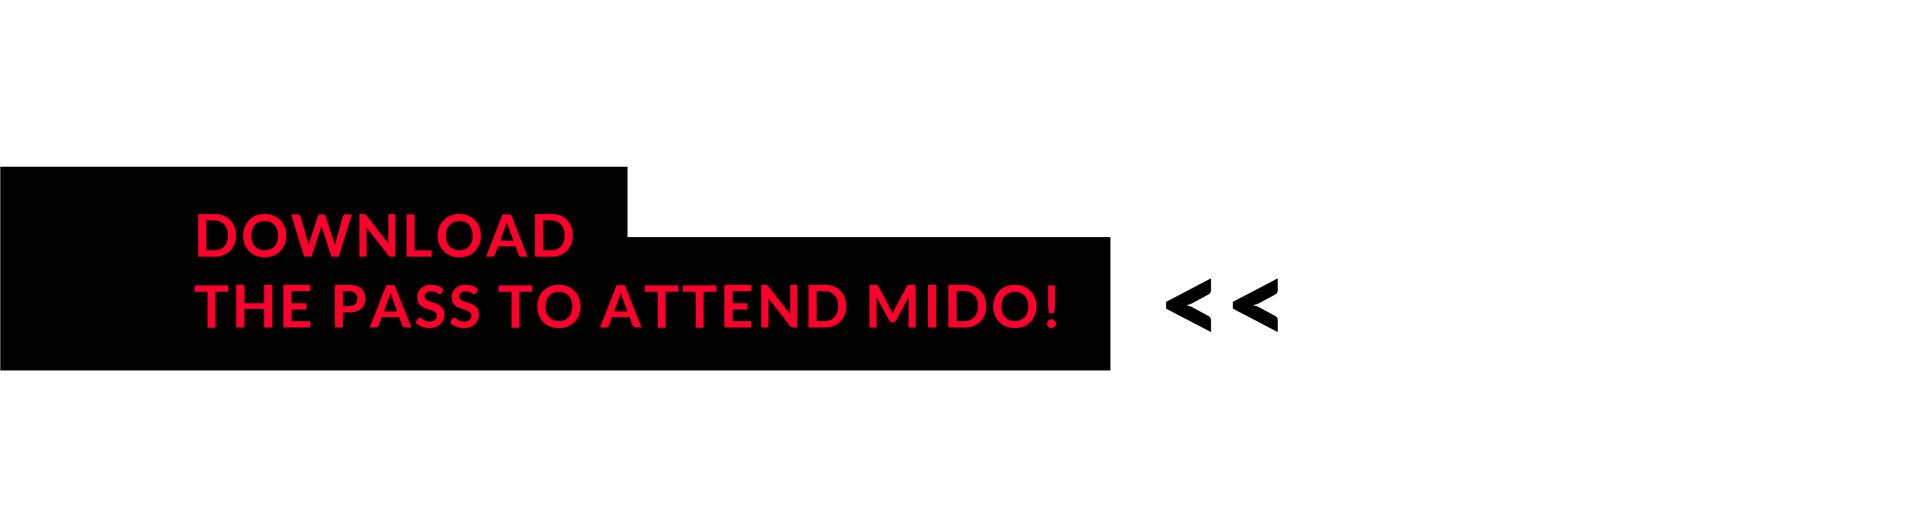 Download the pass to attend MIDO!